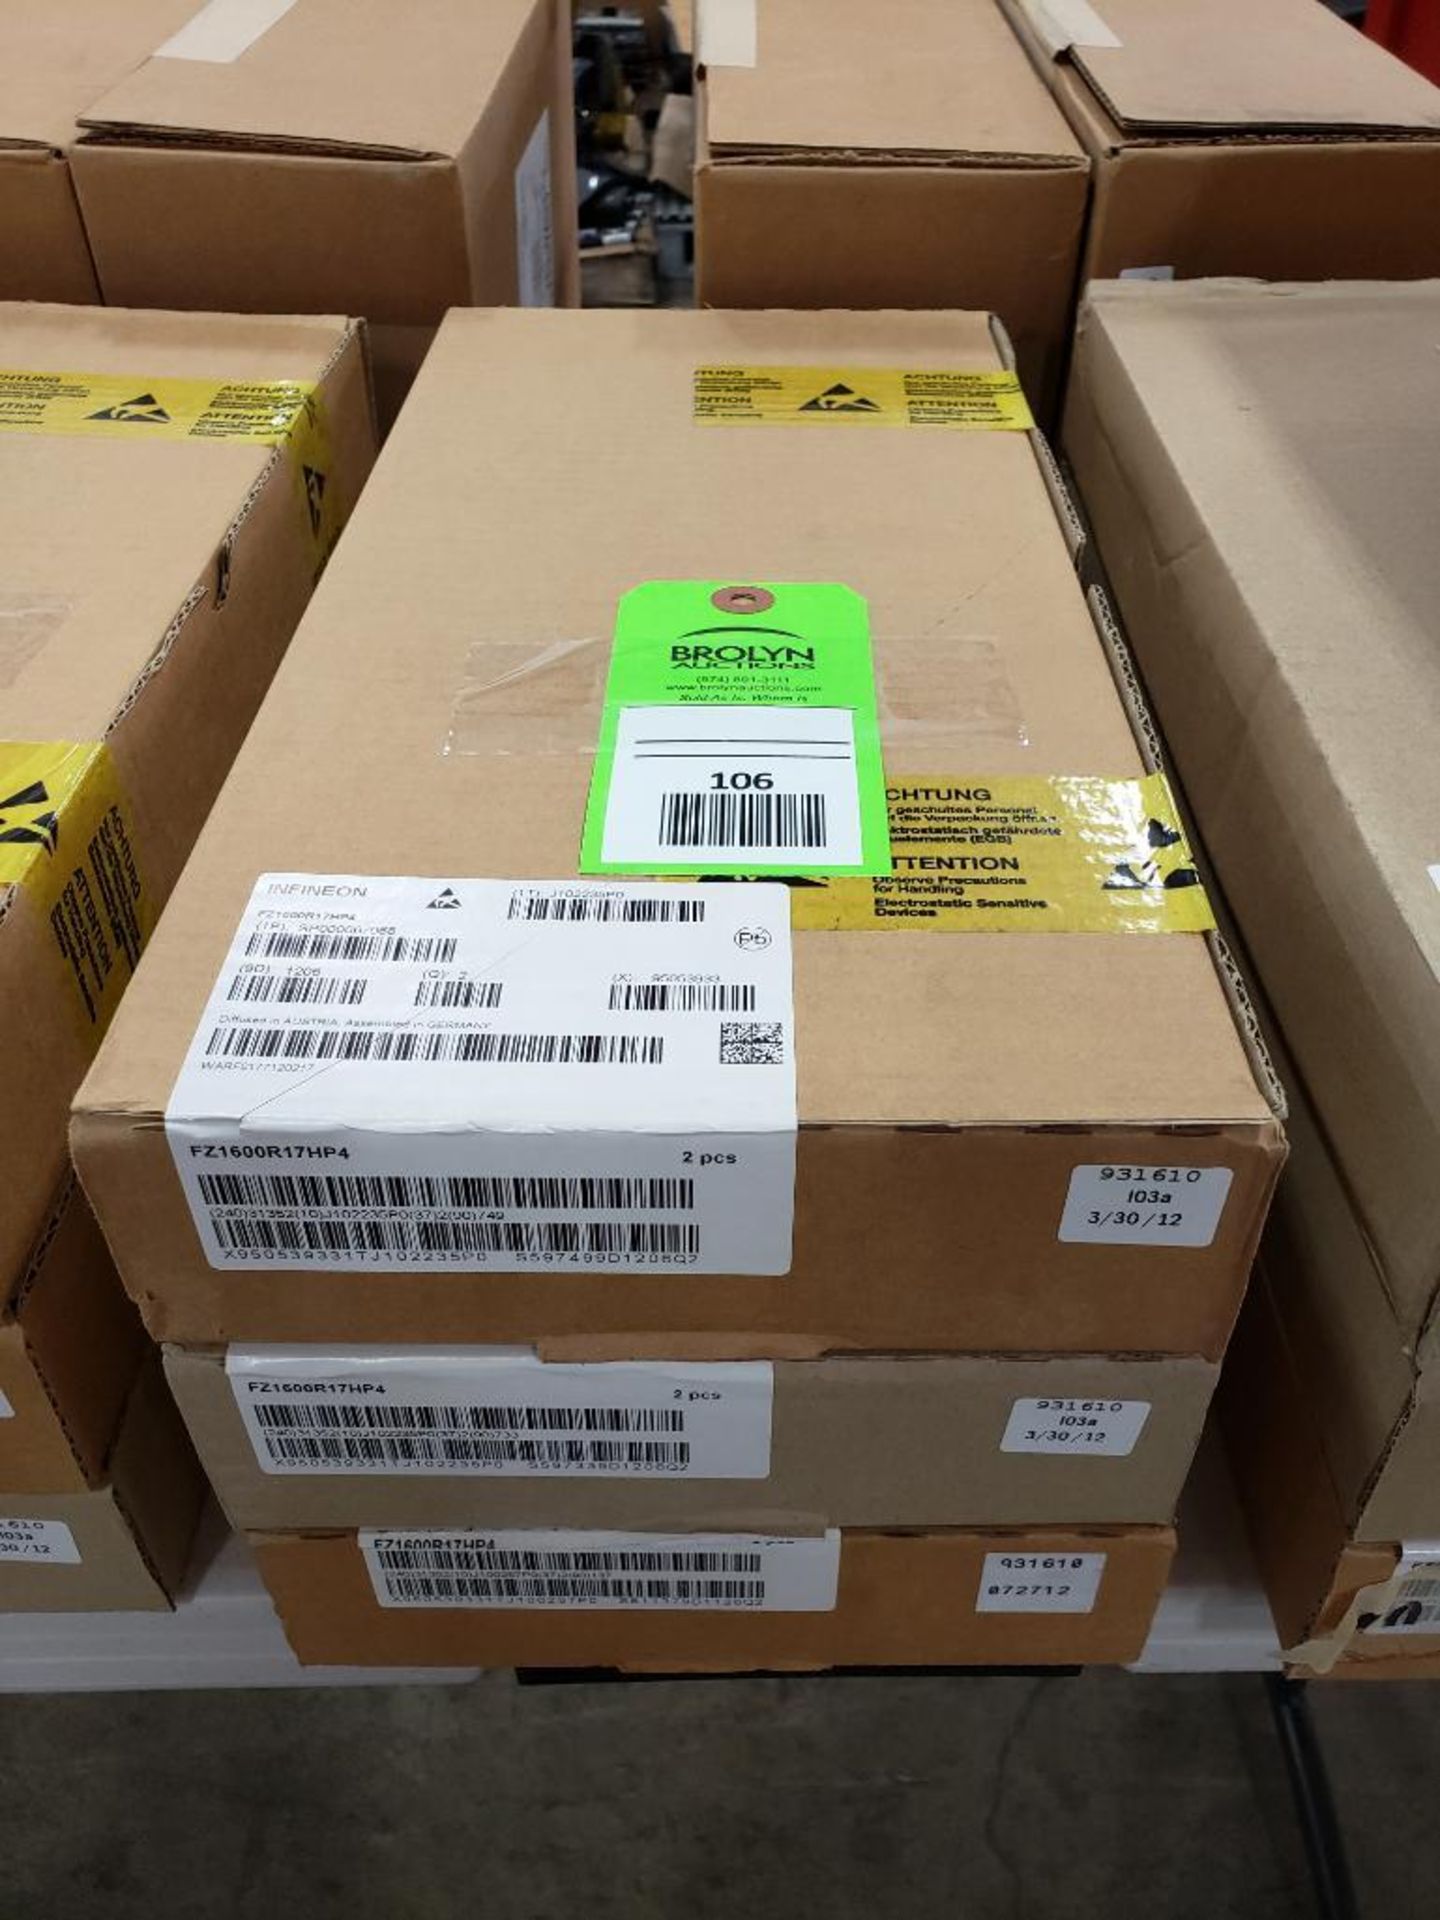 Qty 6 - Infineon semiconductor units. Part number FZ1600R17HP4. Boxed 2 per box bulk. New in box.